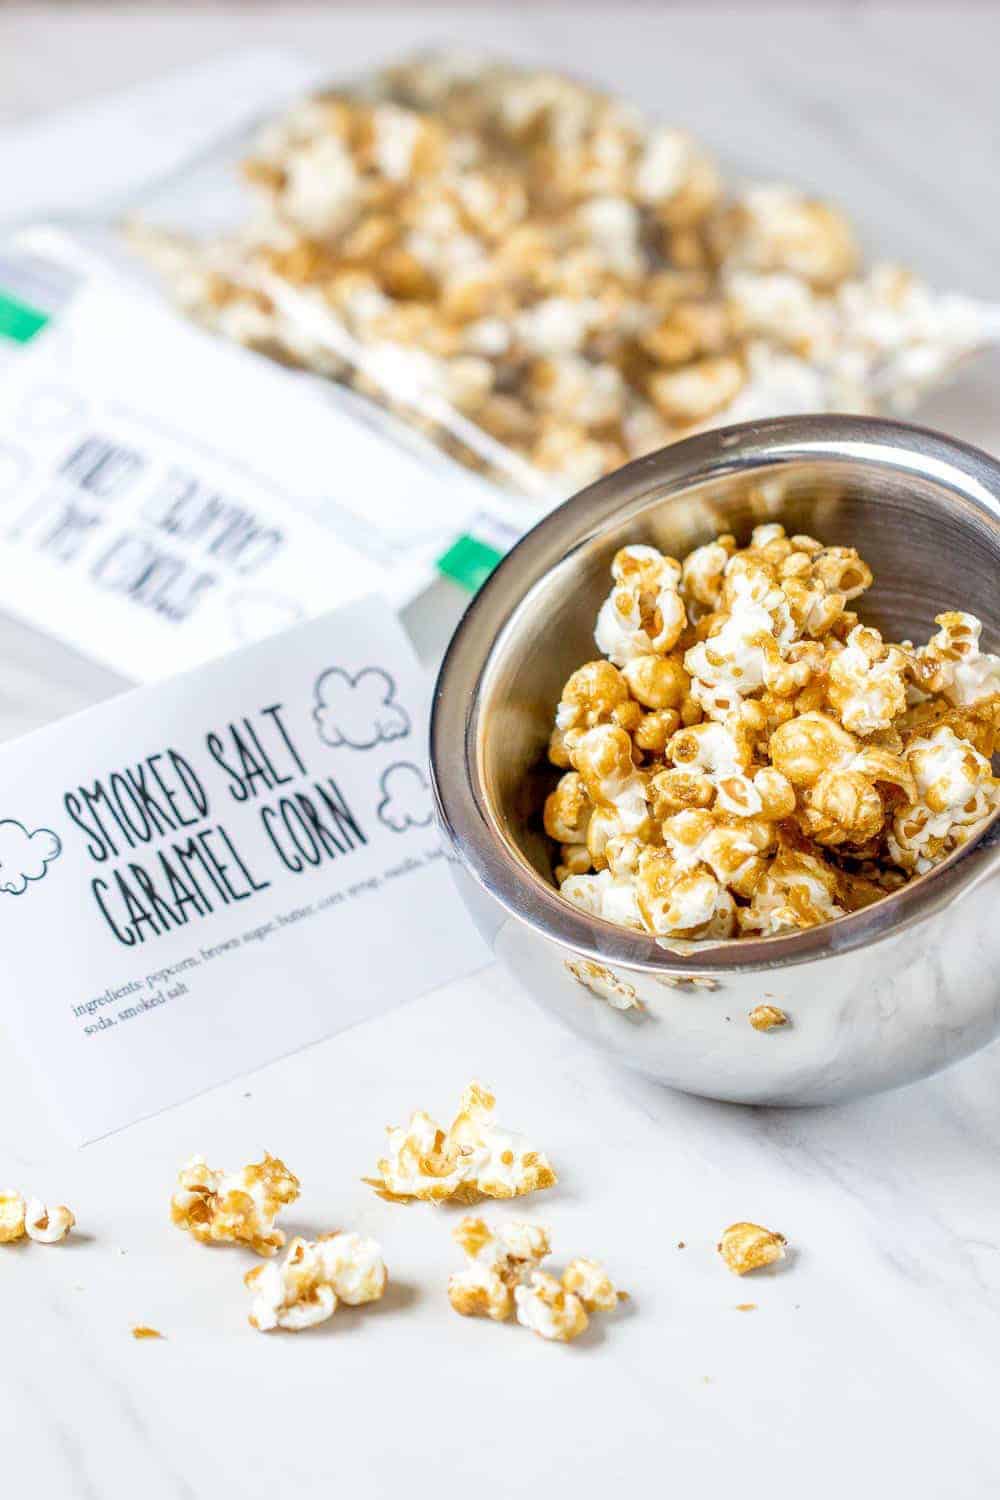 Smoked salt caramel corn is a wonderful snacking treat. The smoked salt gives it that little bit of extra that you didn't know you needed.